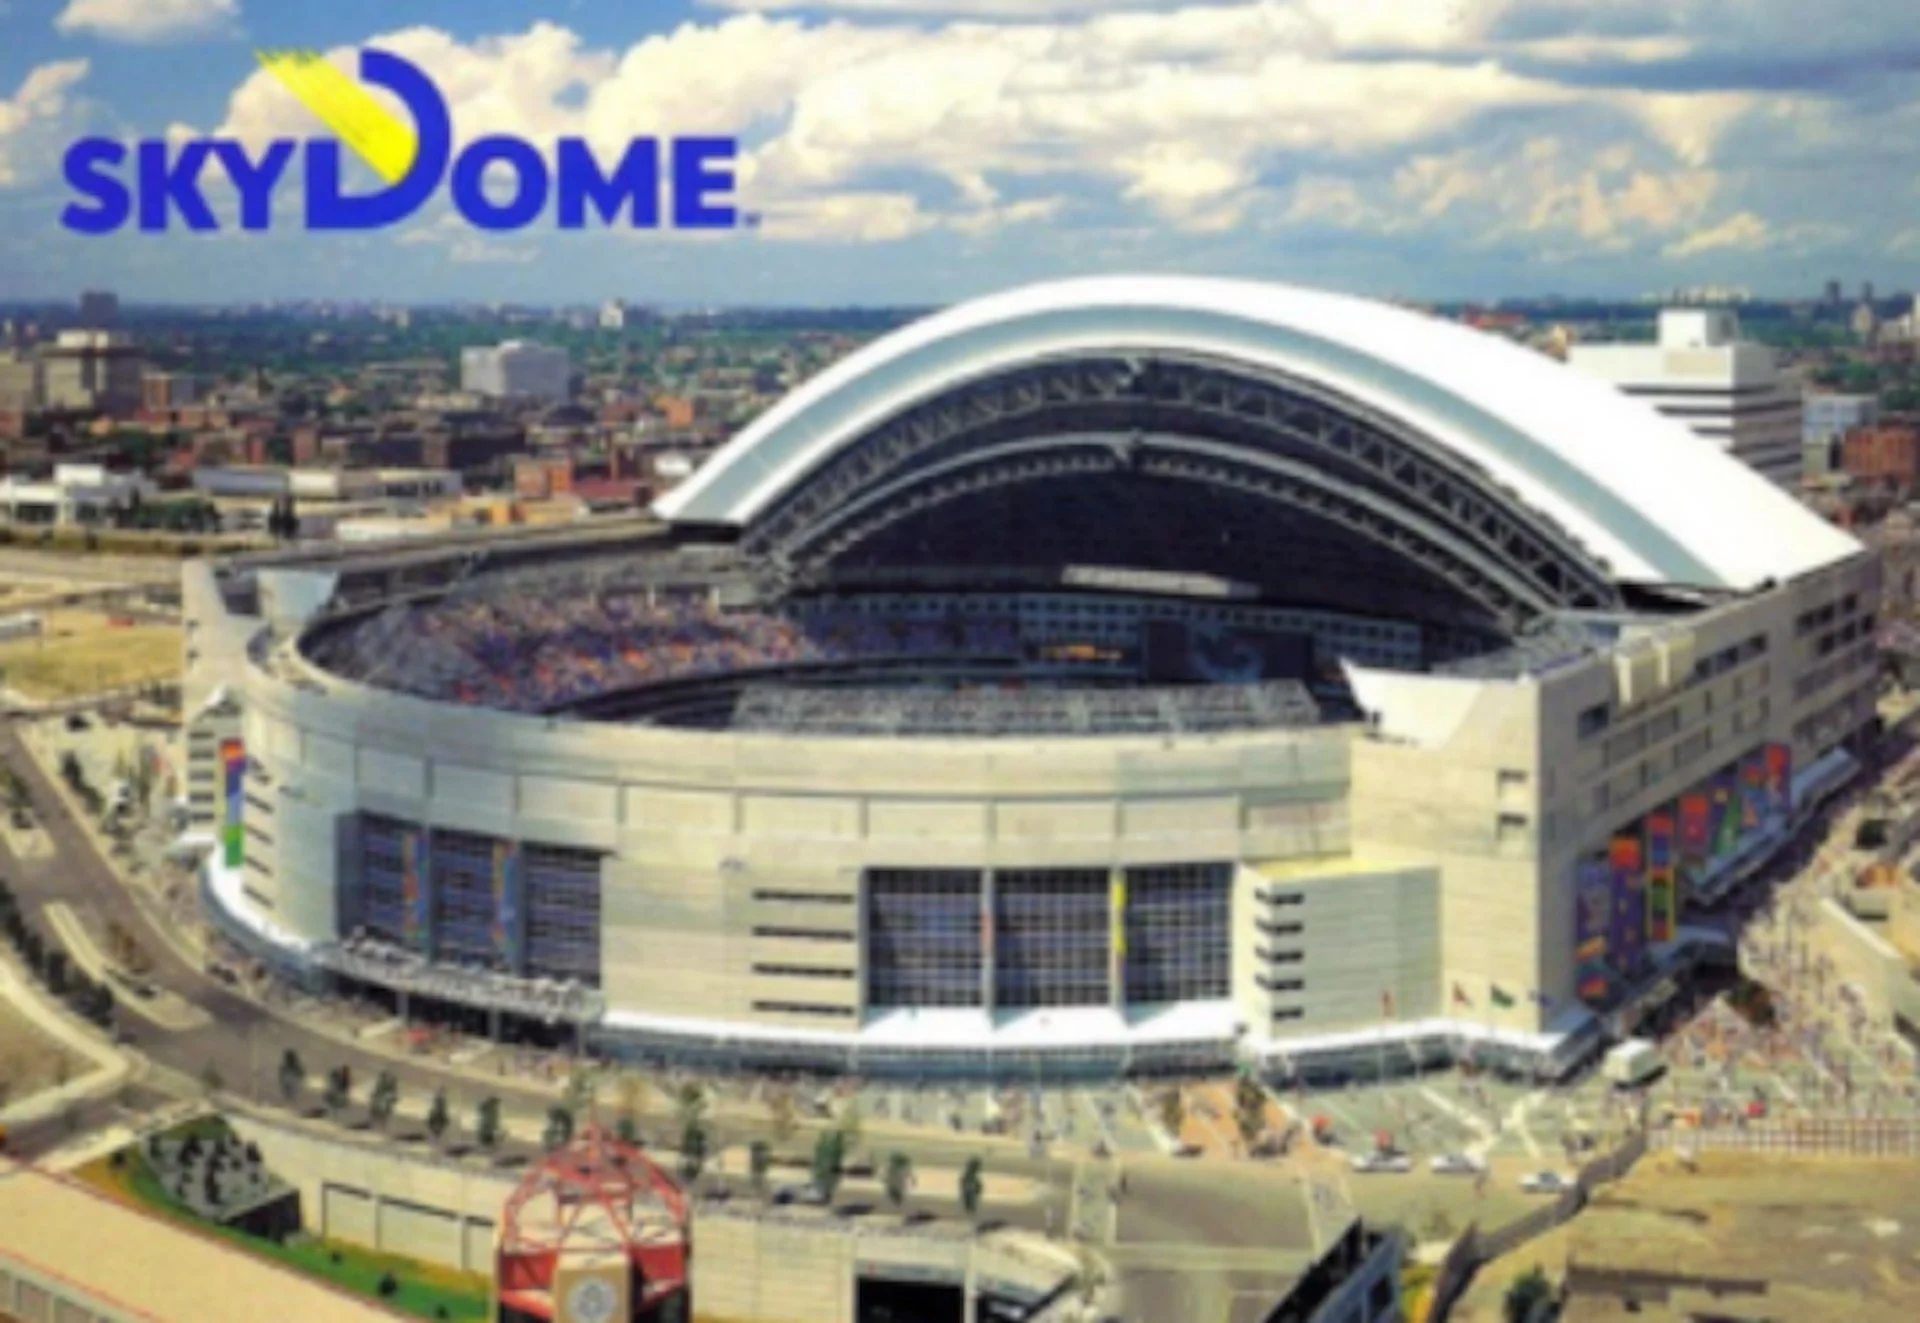 45,000 spectators were soaked during the SkyDome's opening ceremonies